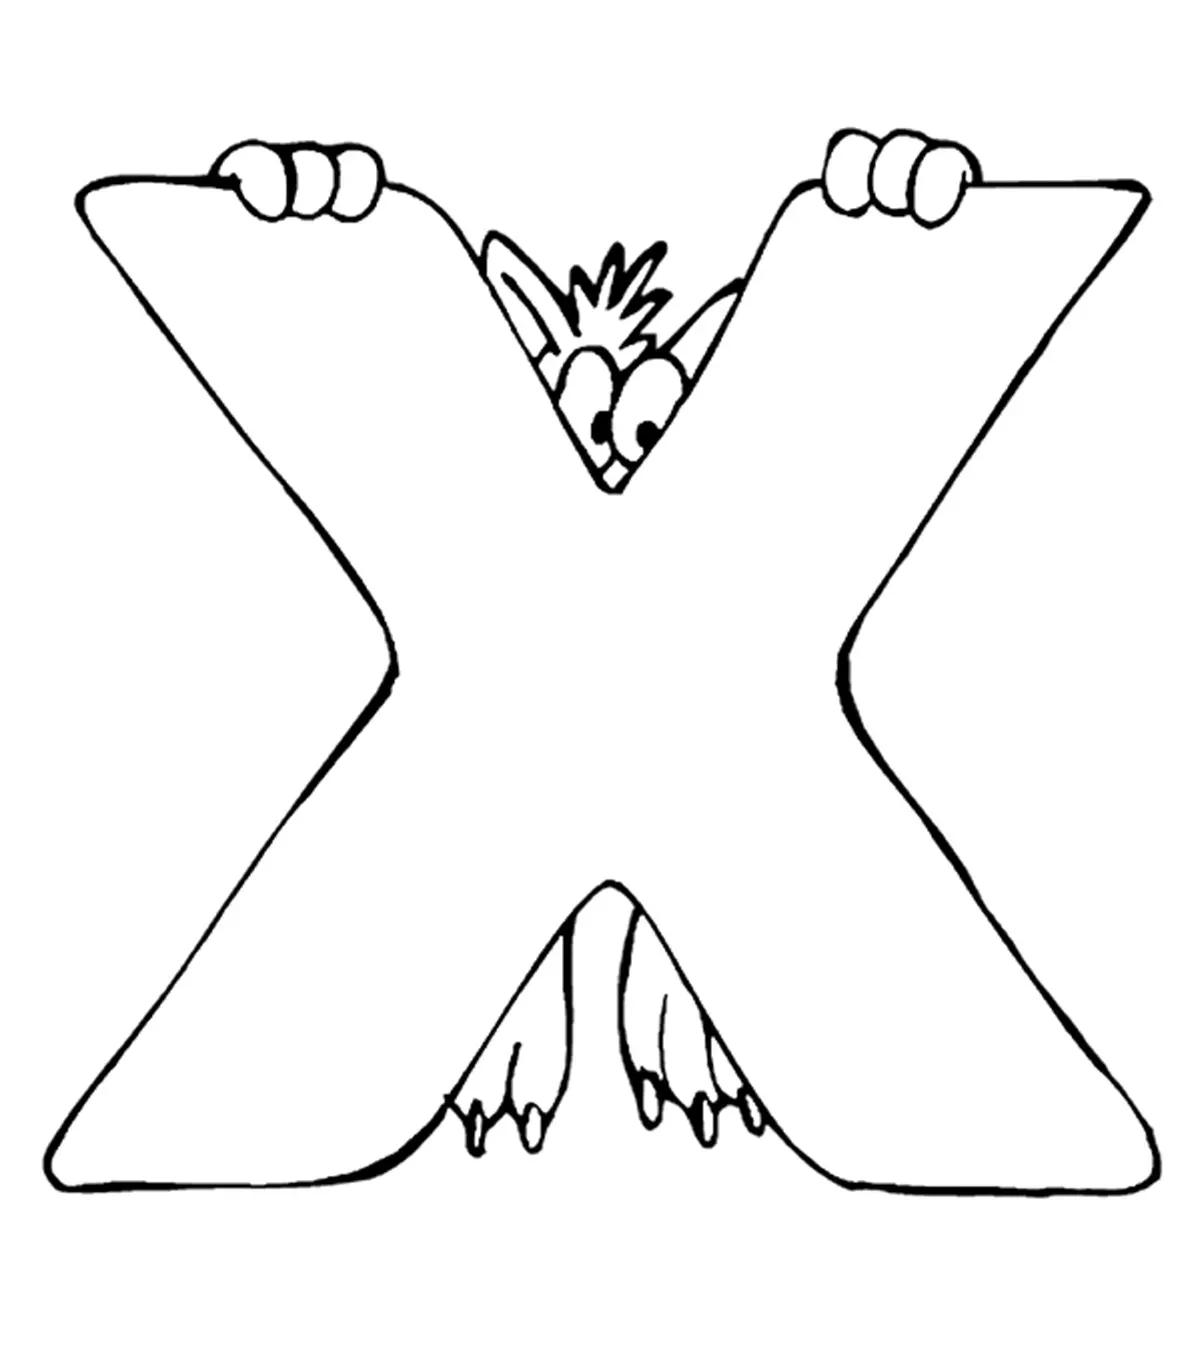 Top 10 Letter ‘X’ Coloring Pages Your Toddler Will Love To Learn & Color